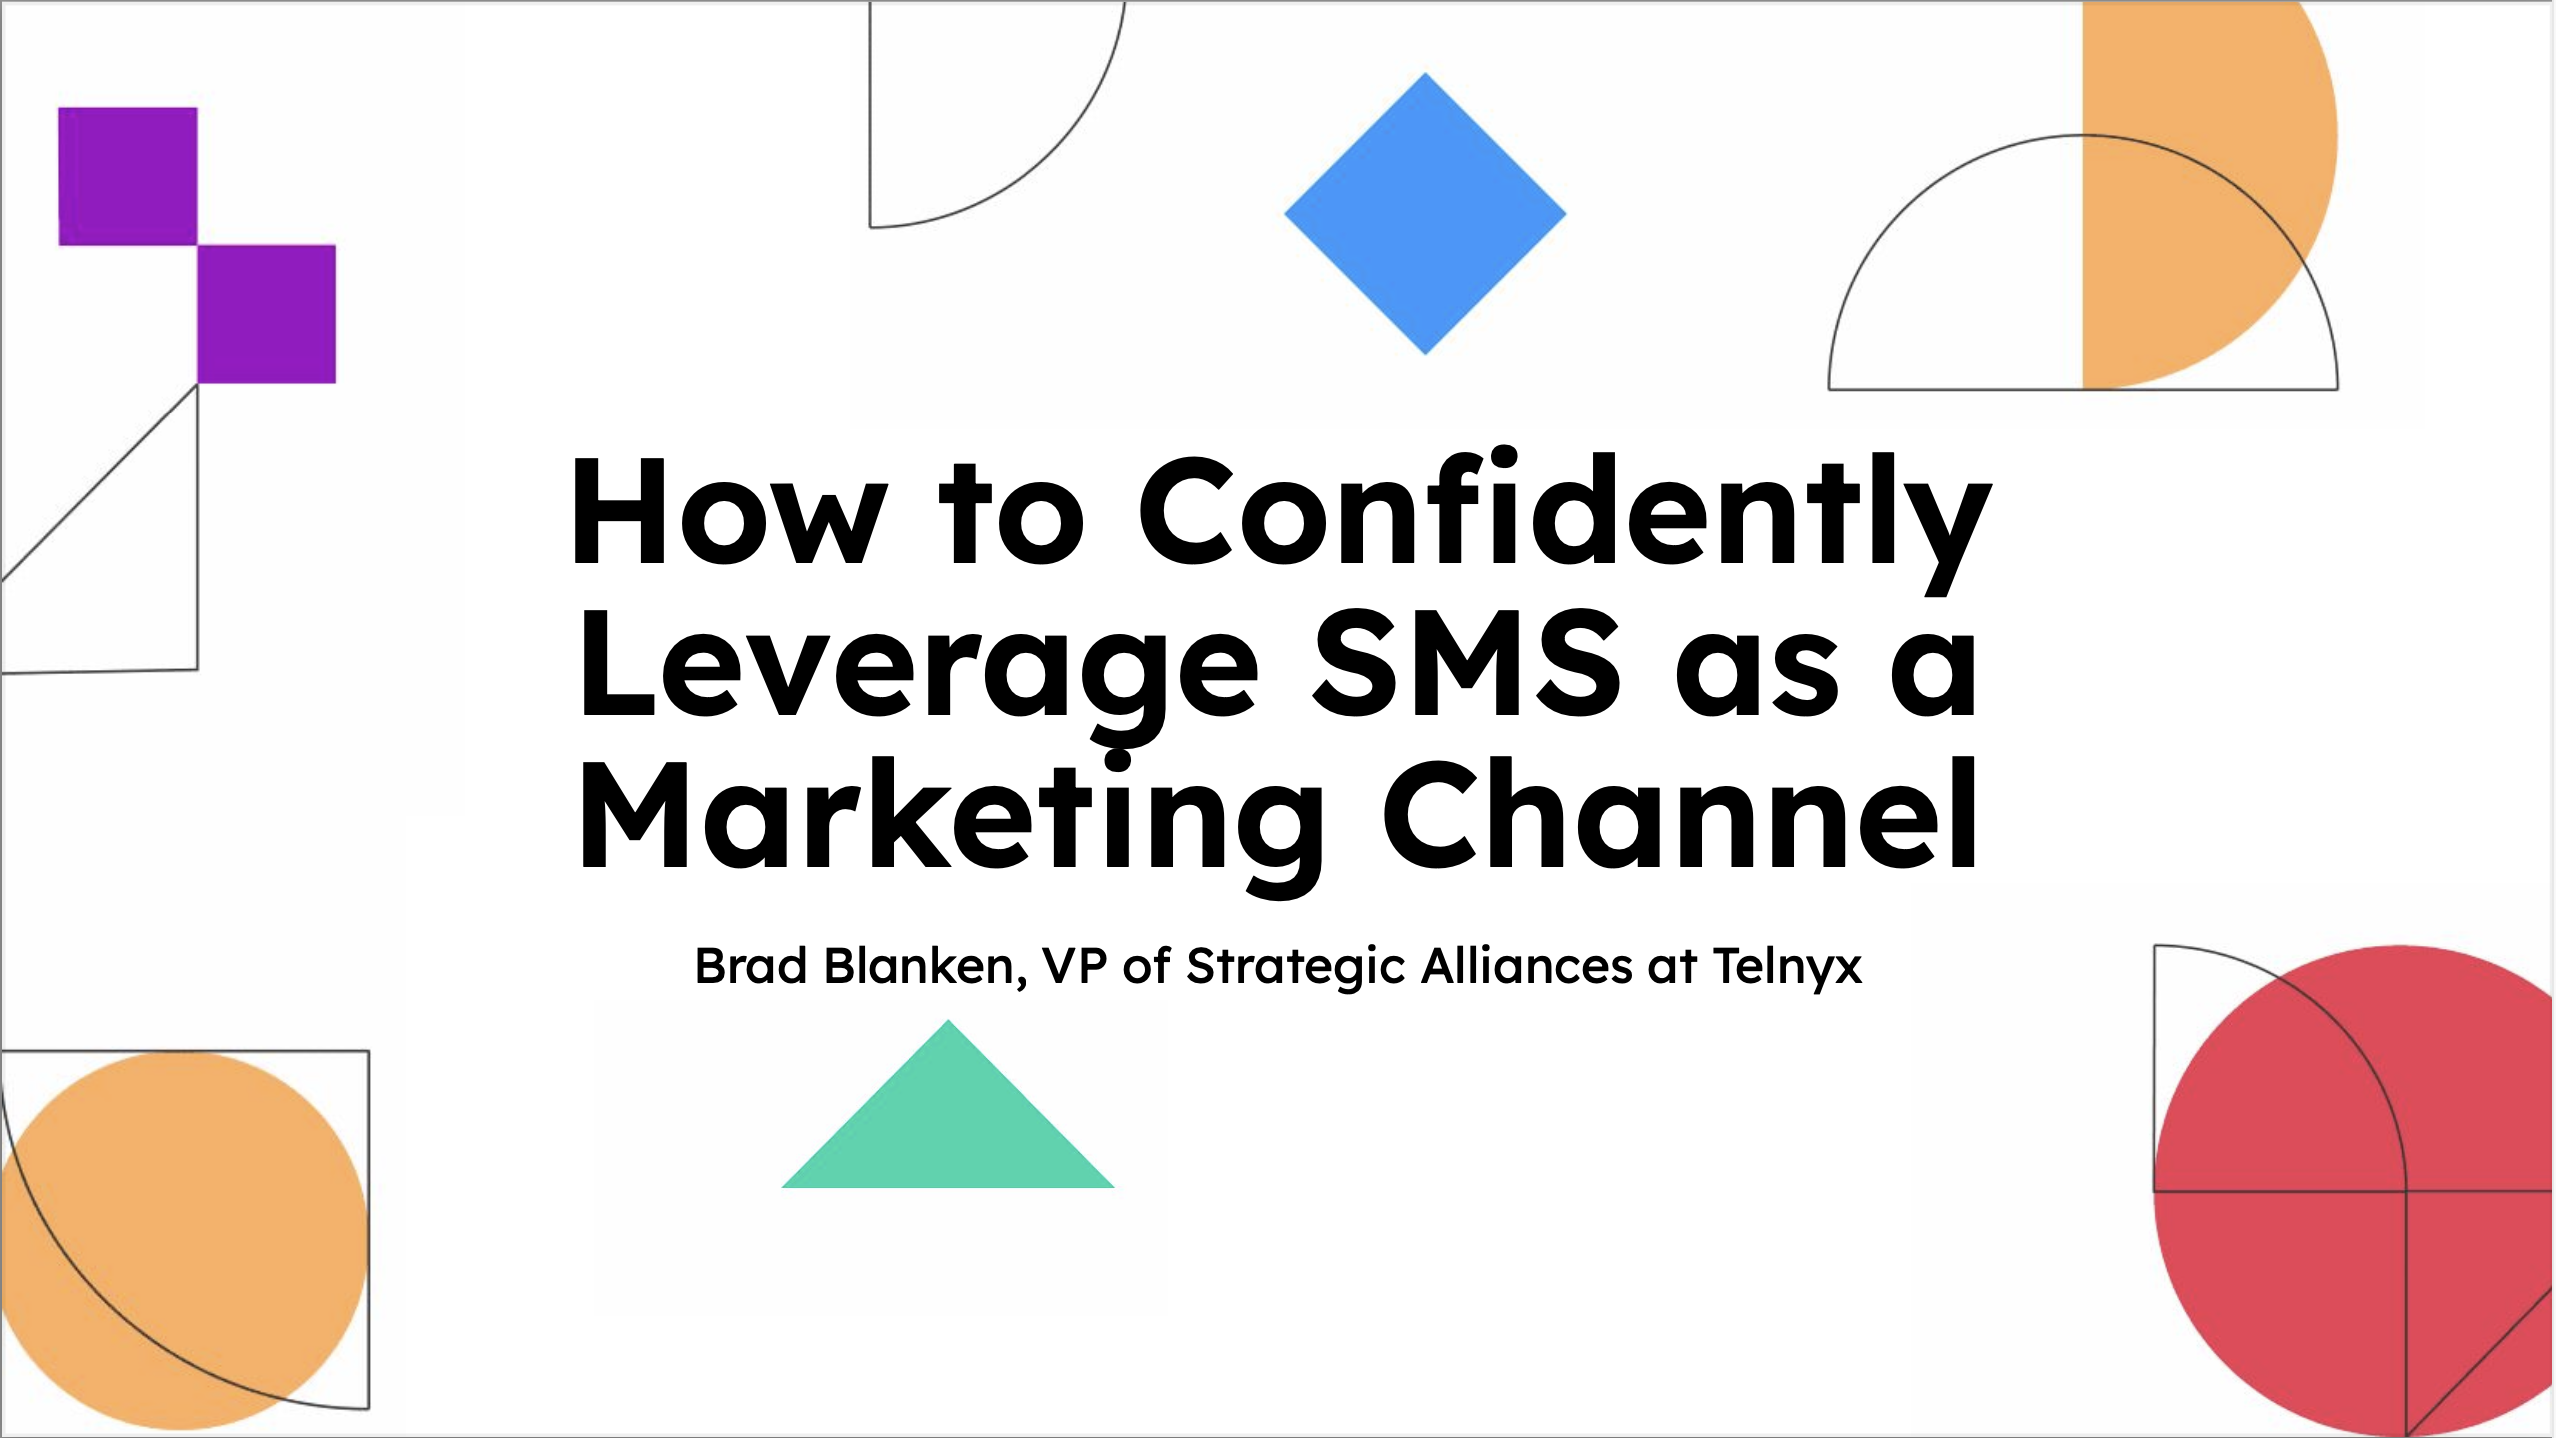 How to Confidently Leverage SMS as a Marketing Channel